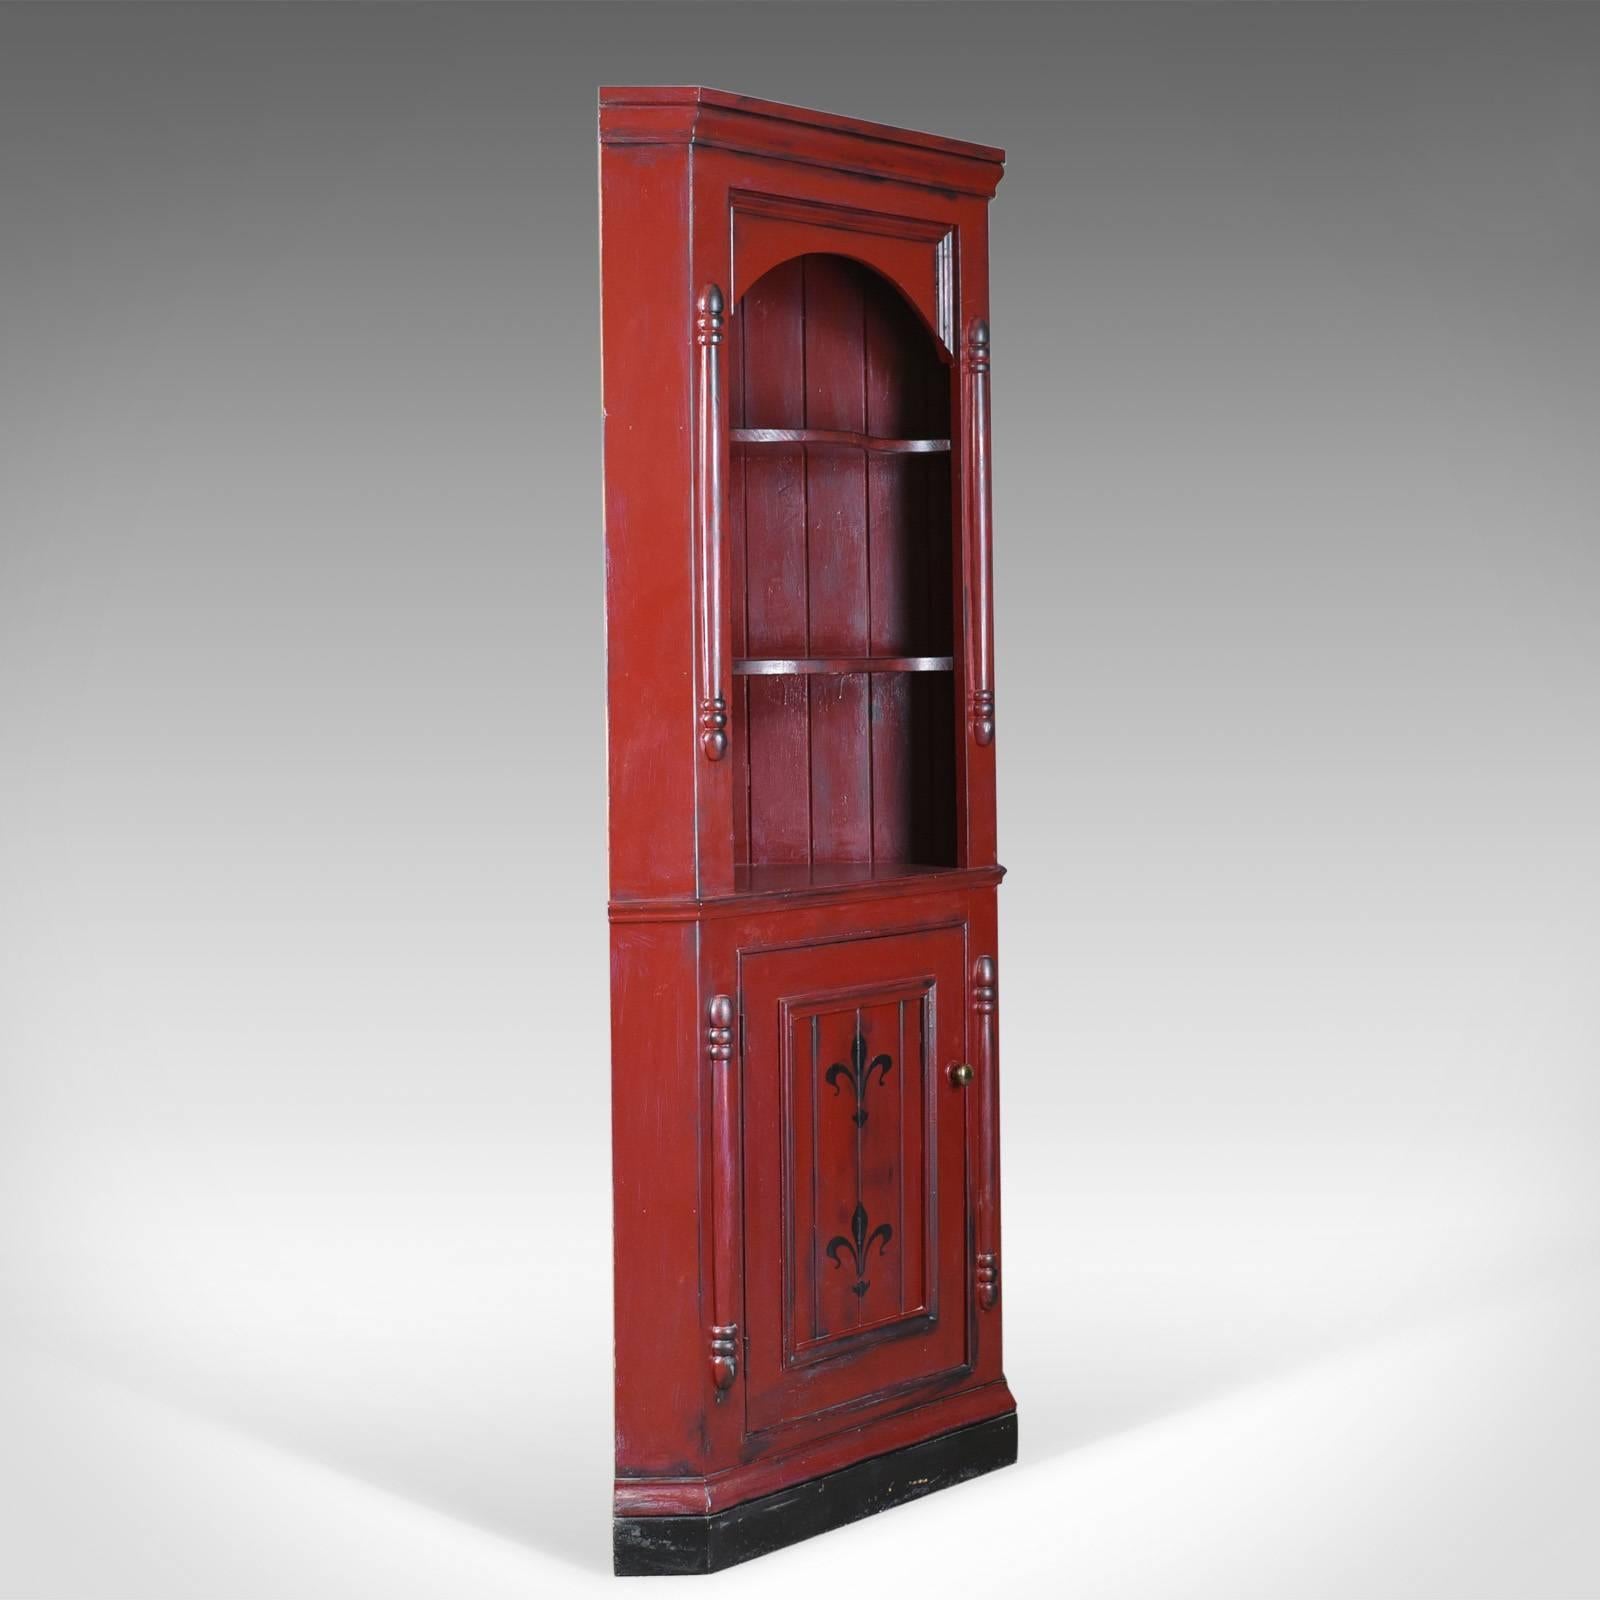 This is a vintage corner cabinet, a late 20th century painted pine cupboard.

Attractively finished in an aged rouge paint
Waxed and polished for protection

A pair of serpentine shelves to the upper cabinet
A field panel door decorated with